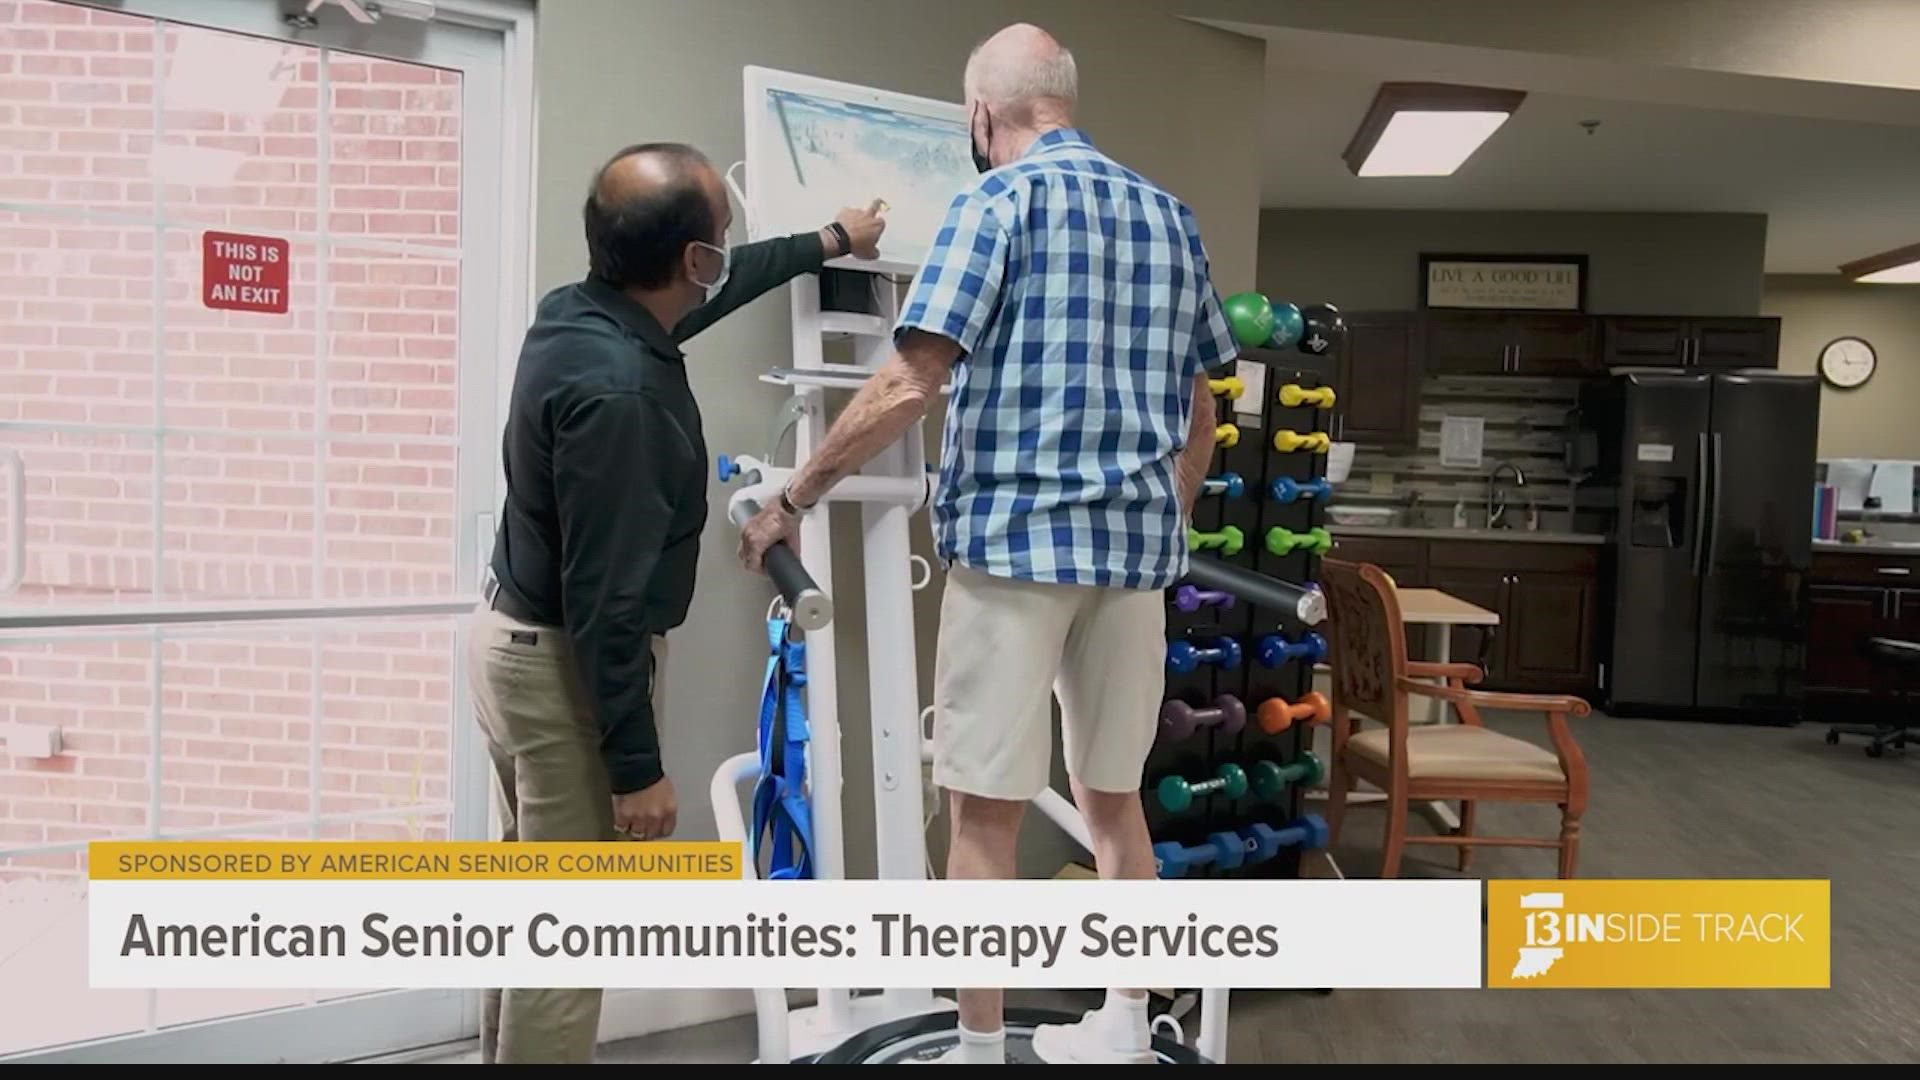 It’s important to stay active and healthy, especially for aging adults. Learn about therapy services at American Senior Communities.